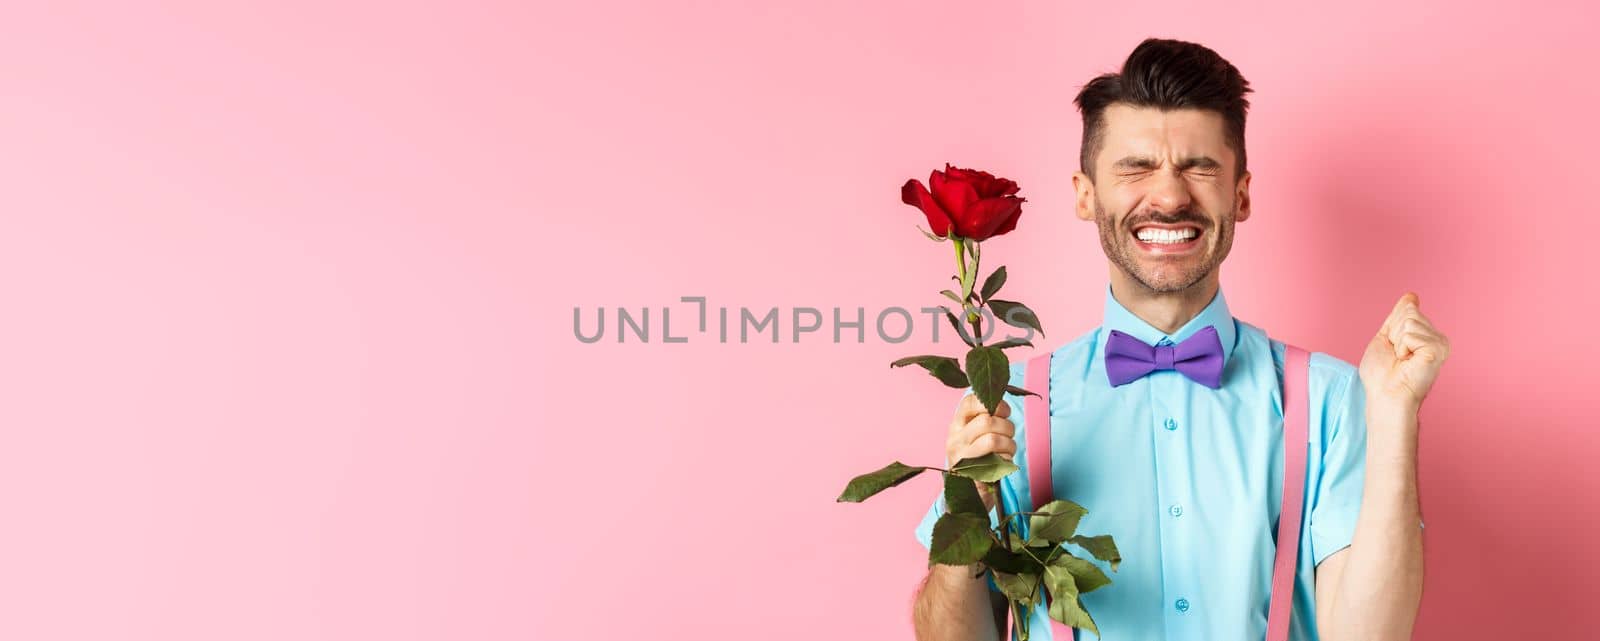 Romance and Valentines day concept. Hopeful man feeling excited before date, waiting for lover with red rose and praying, standing over pink background.